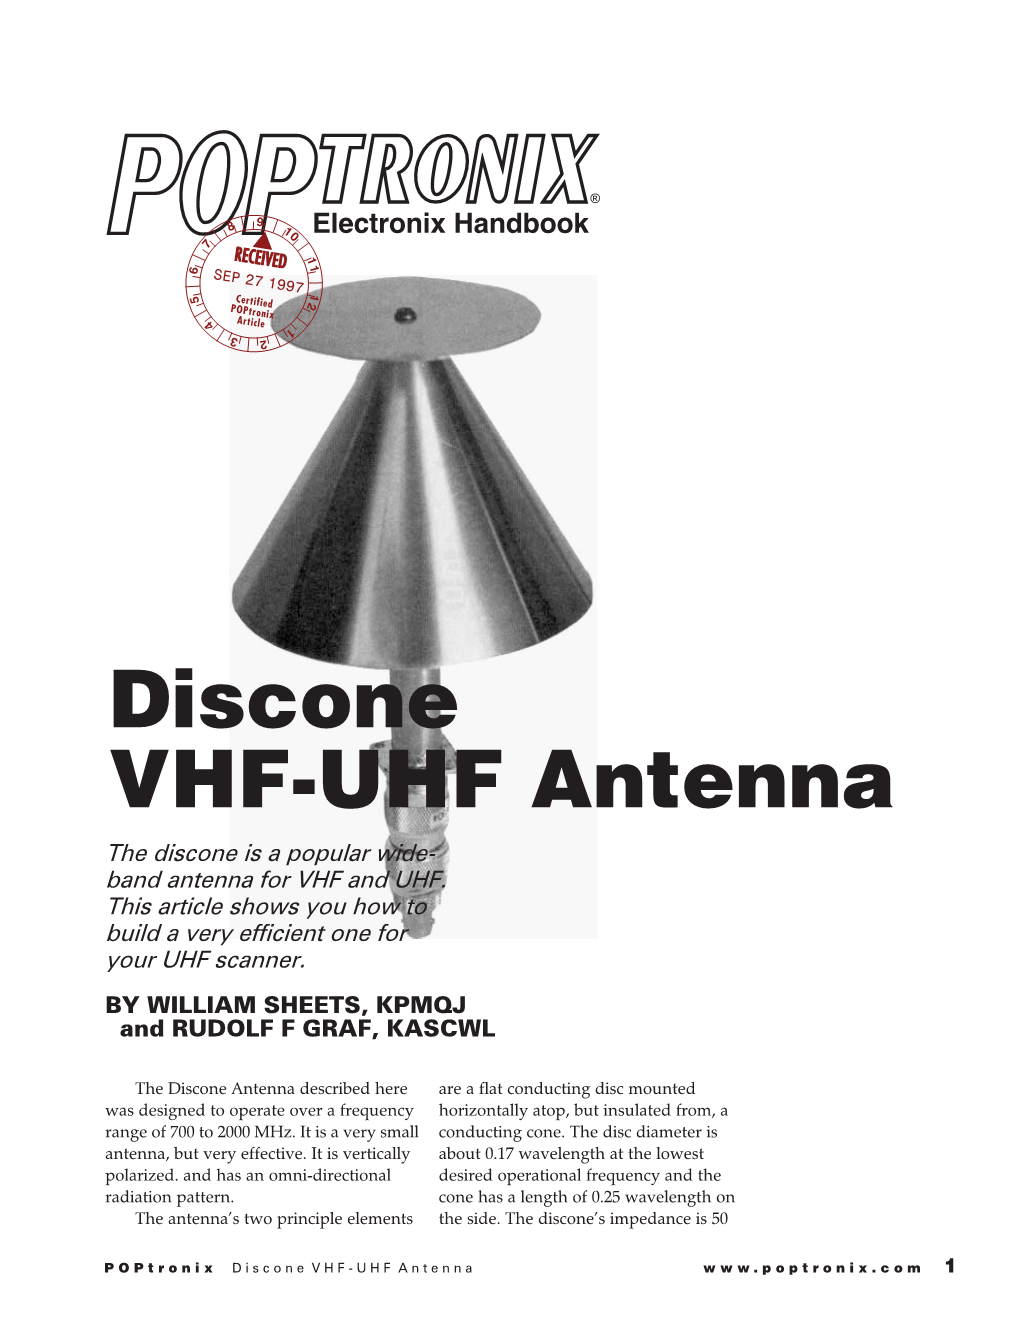 Discone VHF-UHF Antenna the Discone Is a Popular Wide- Band Antenna for VHF and UHF